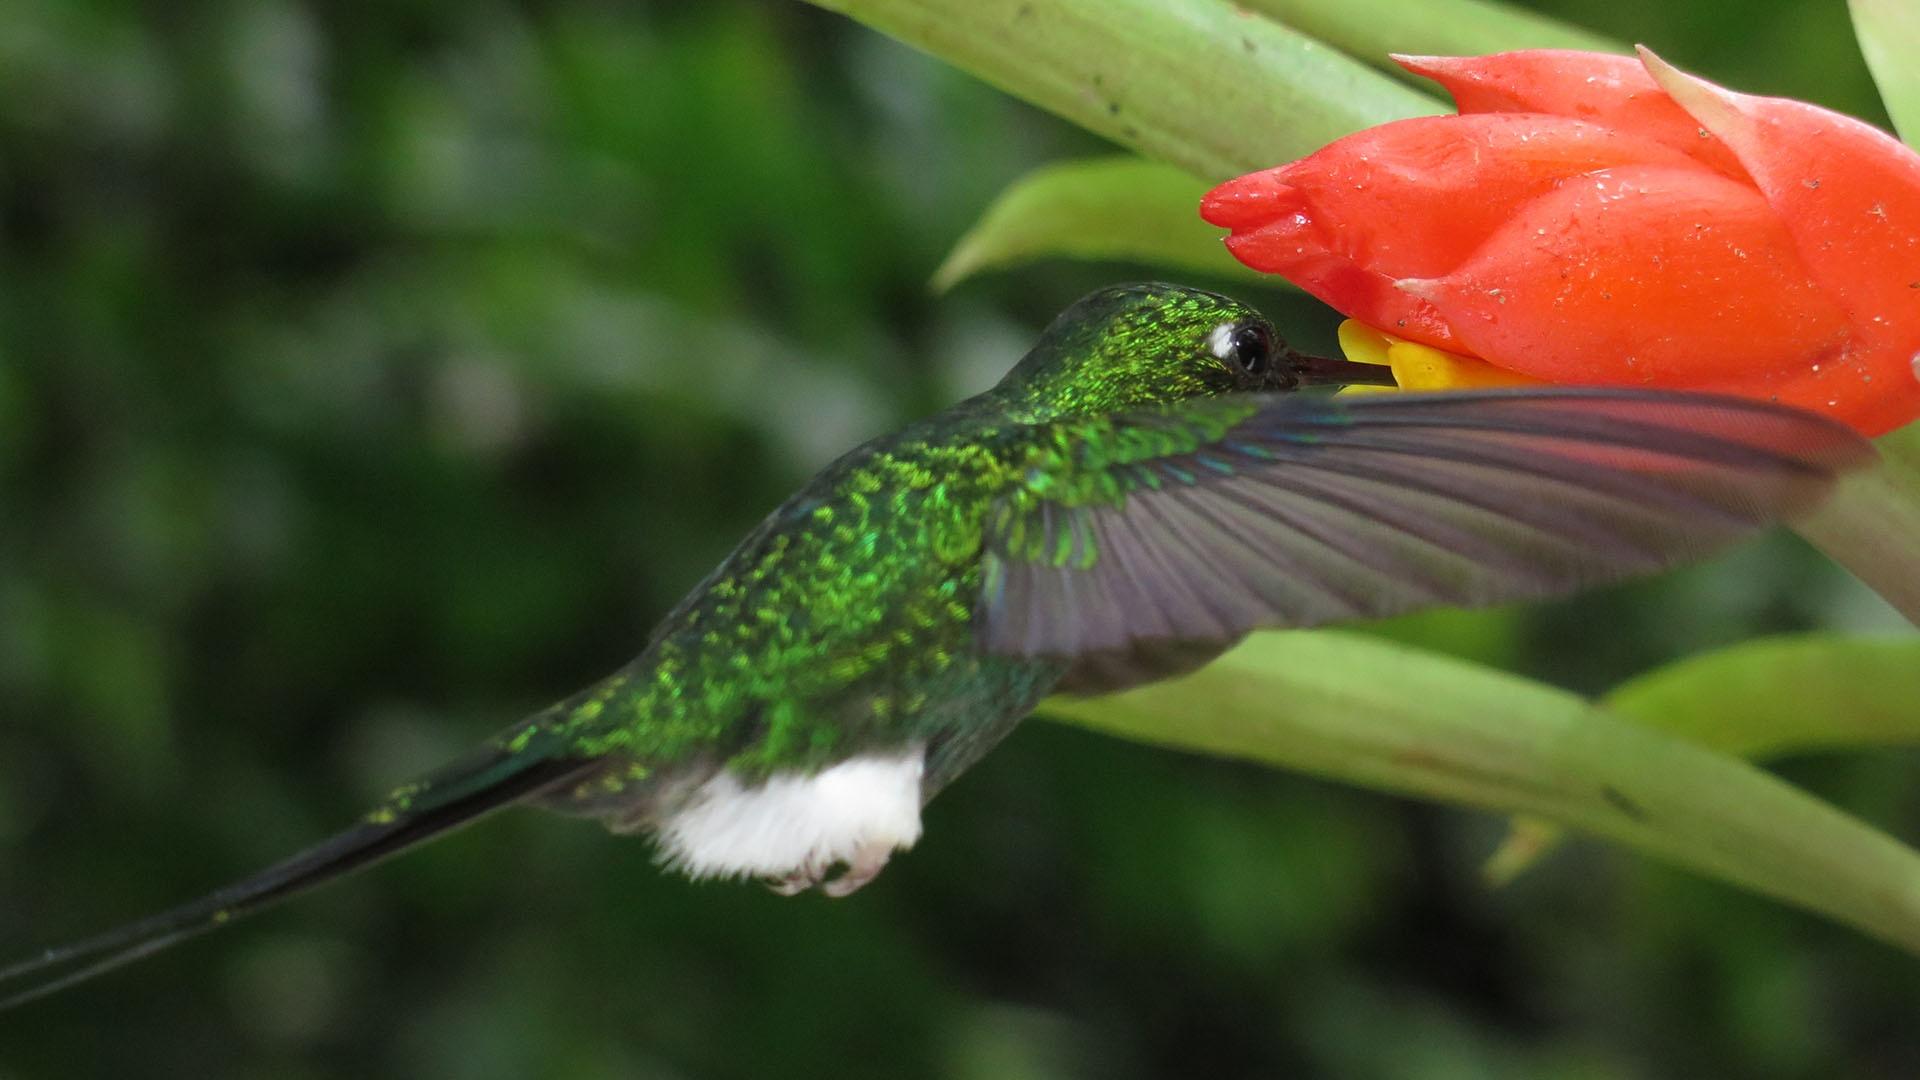 Hovering allows a booted racket-tailed hummingbird to maneuver its beak with surgical precision.